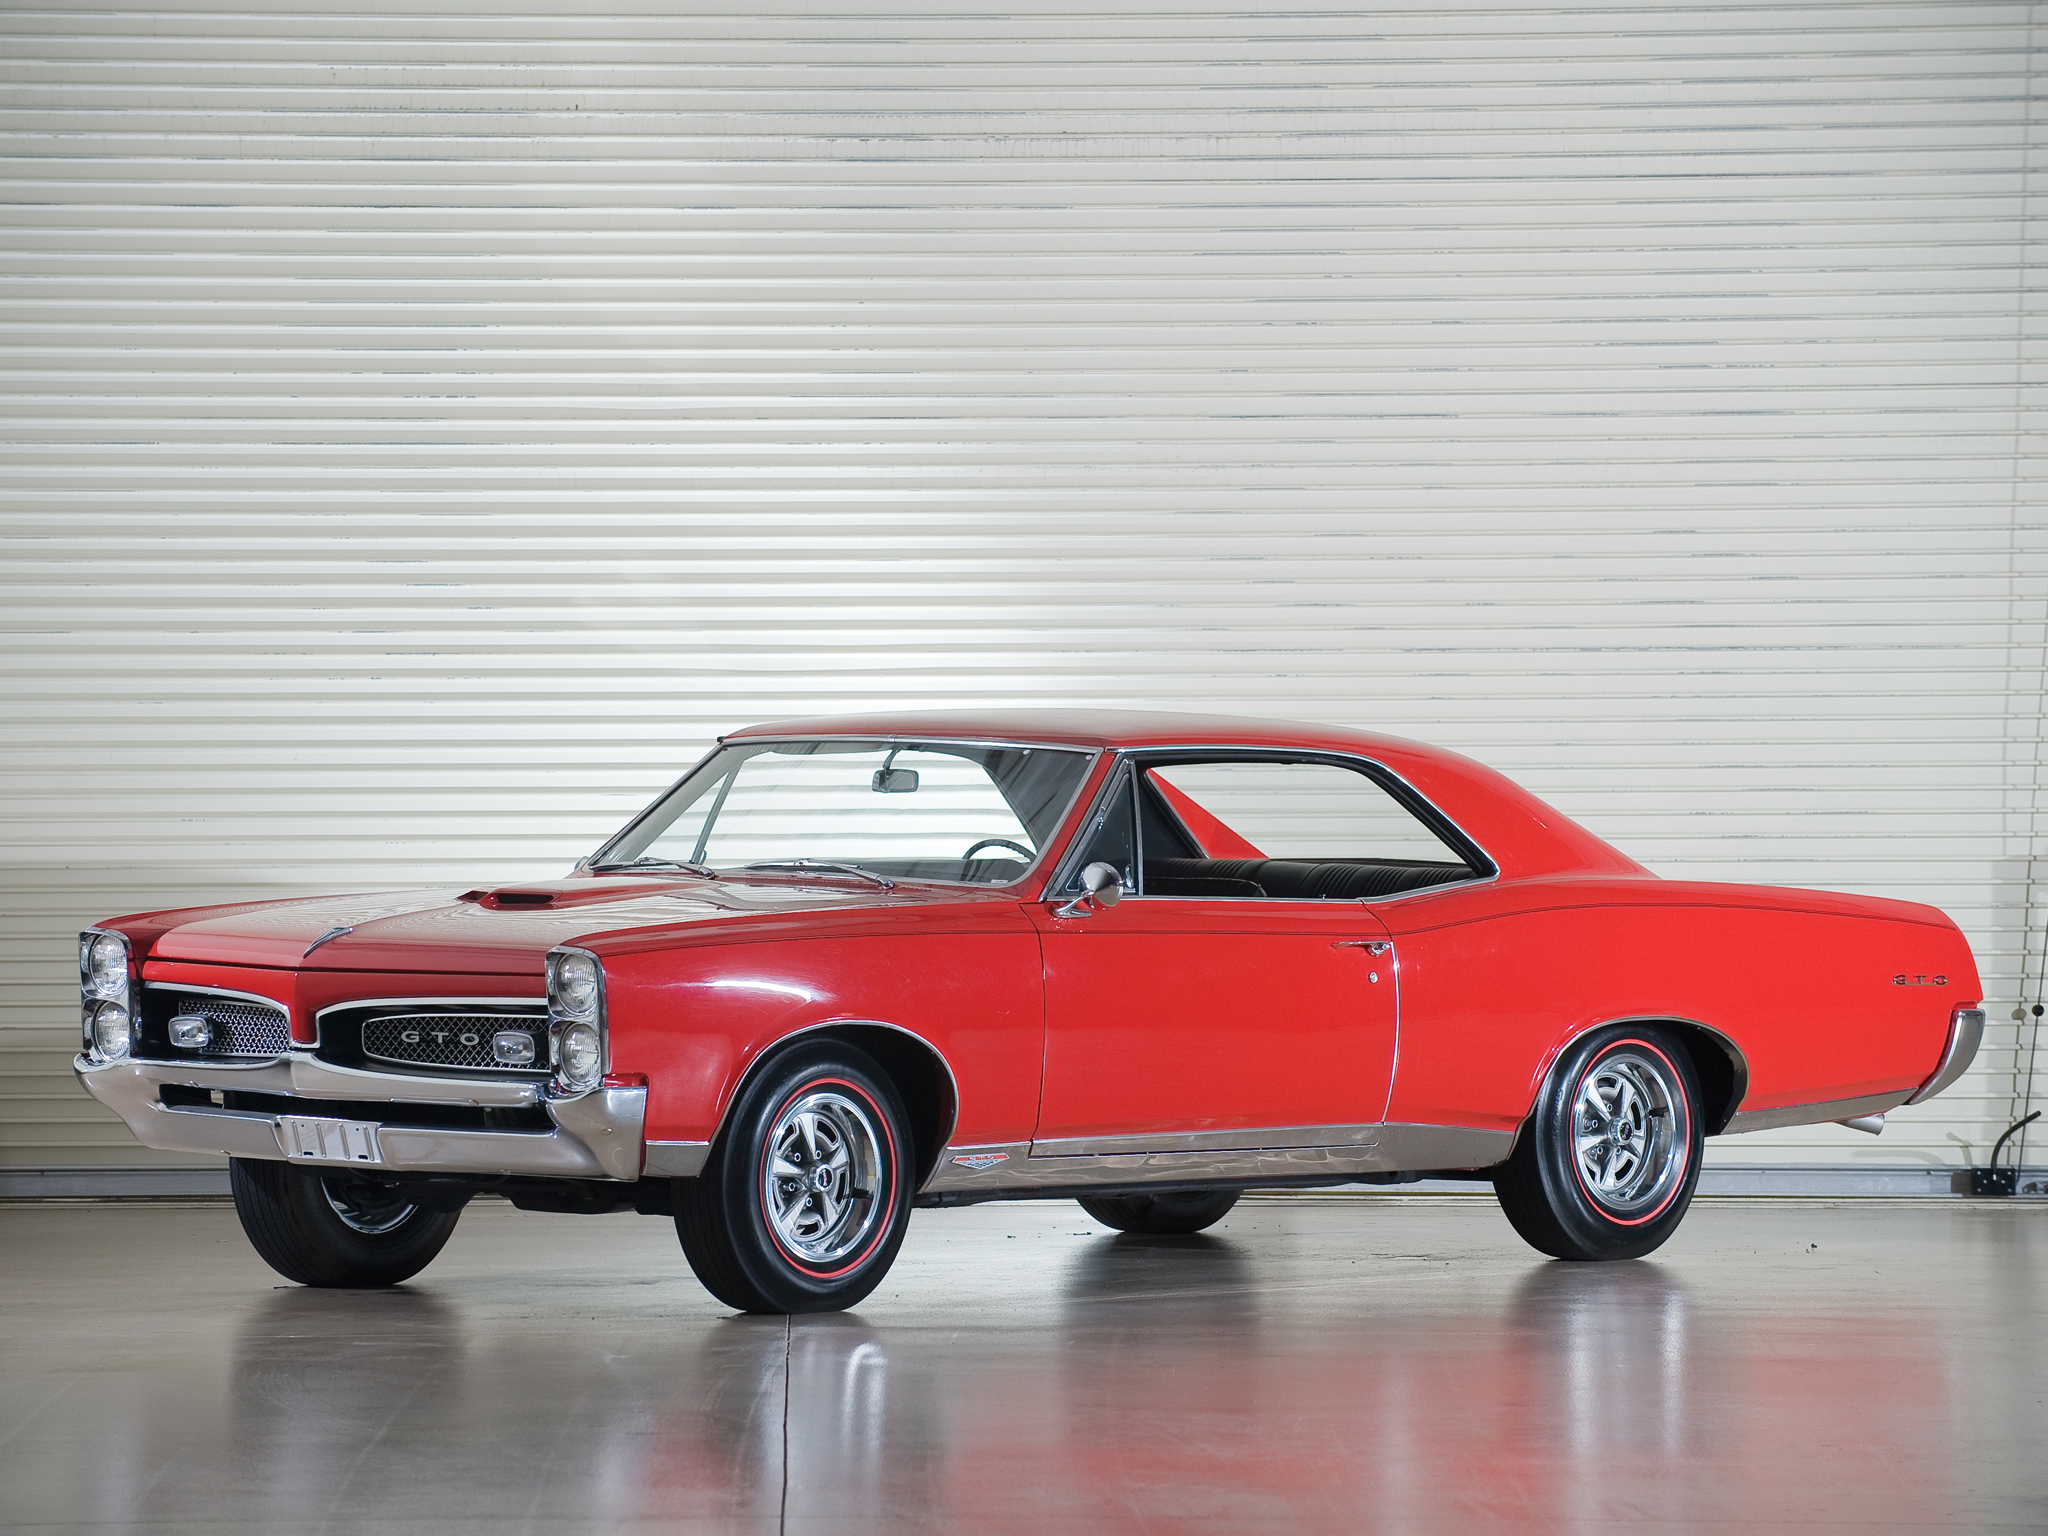 1967, Pontiac, Tempest, Gto, Hardtop, Coupe, Muscle, Classic Wallpapers